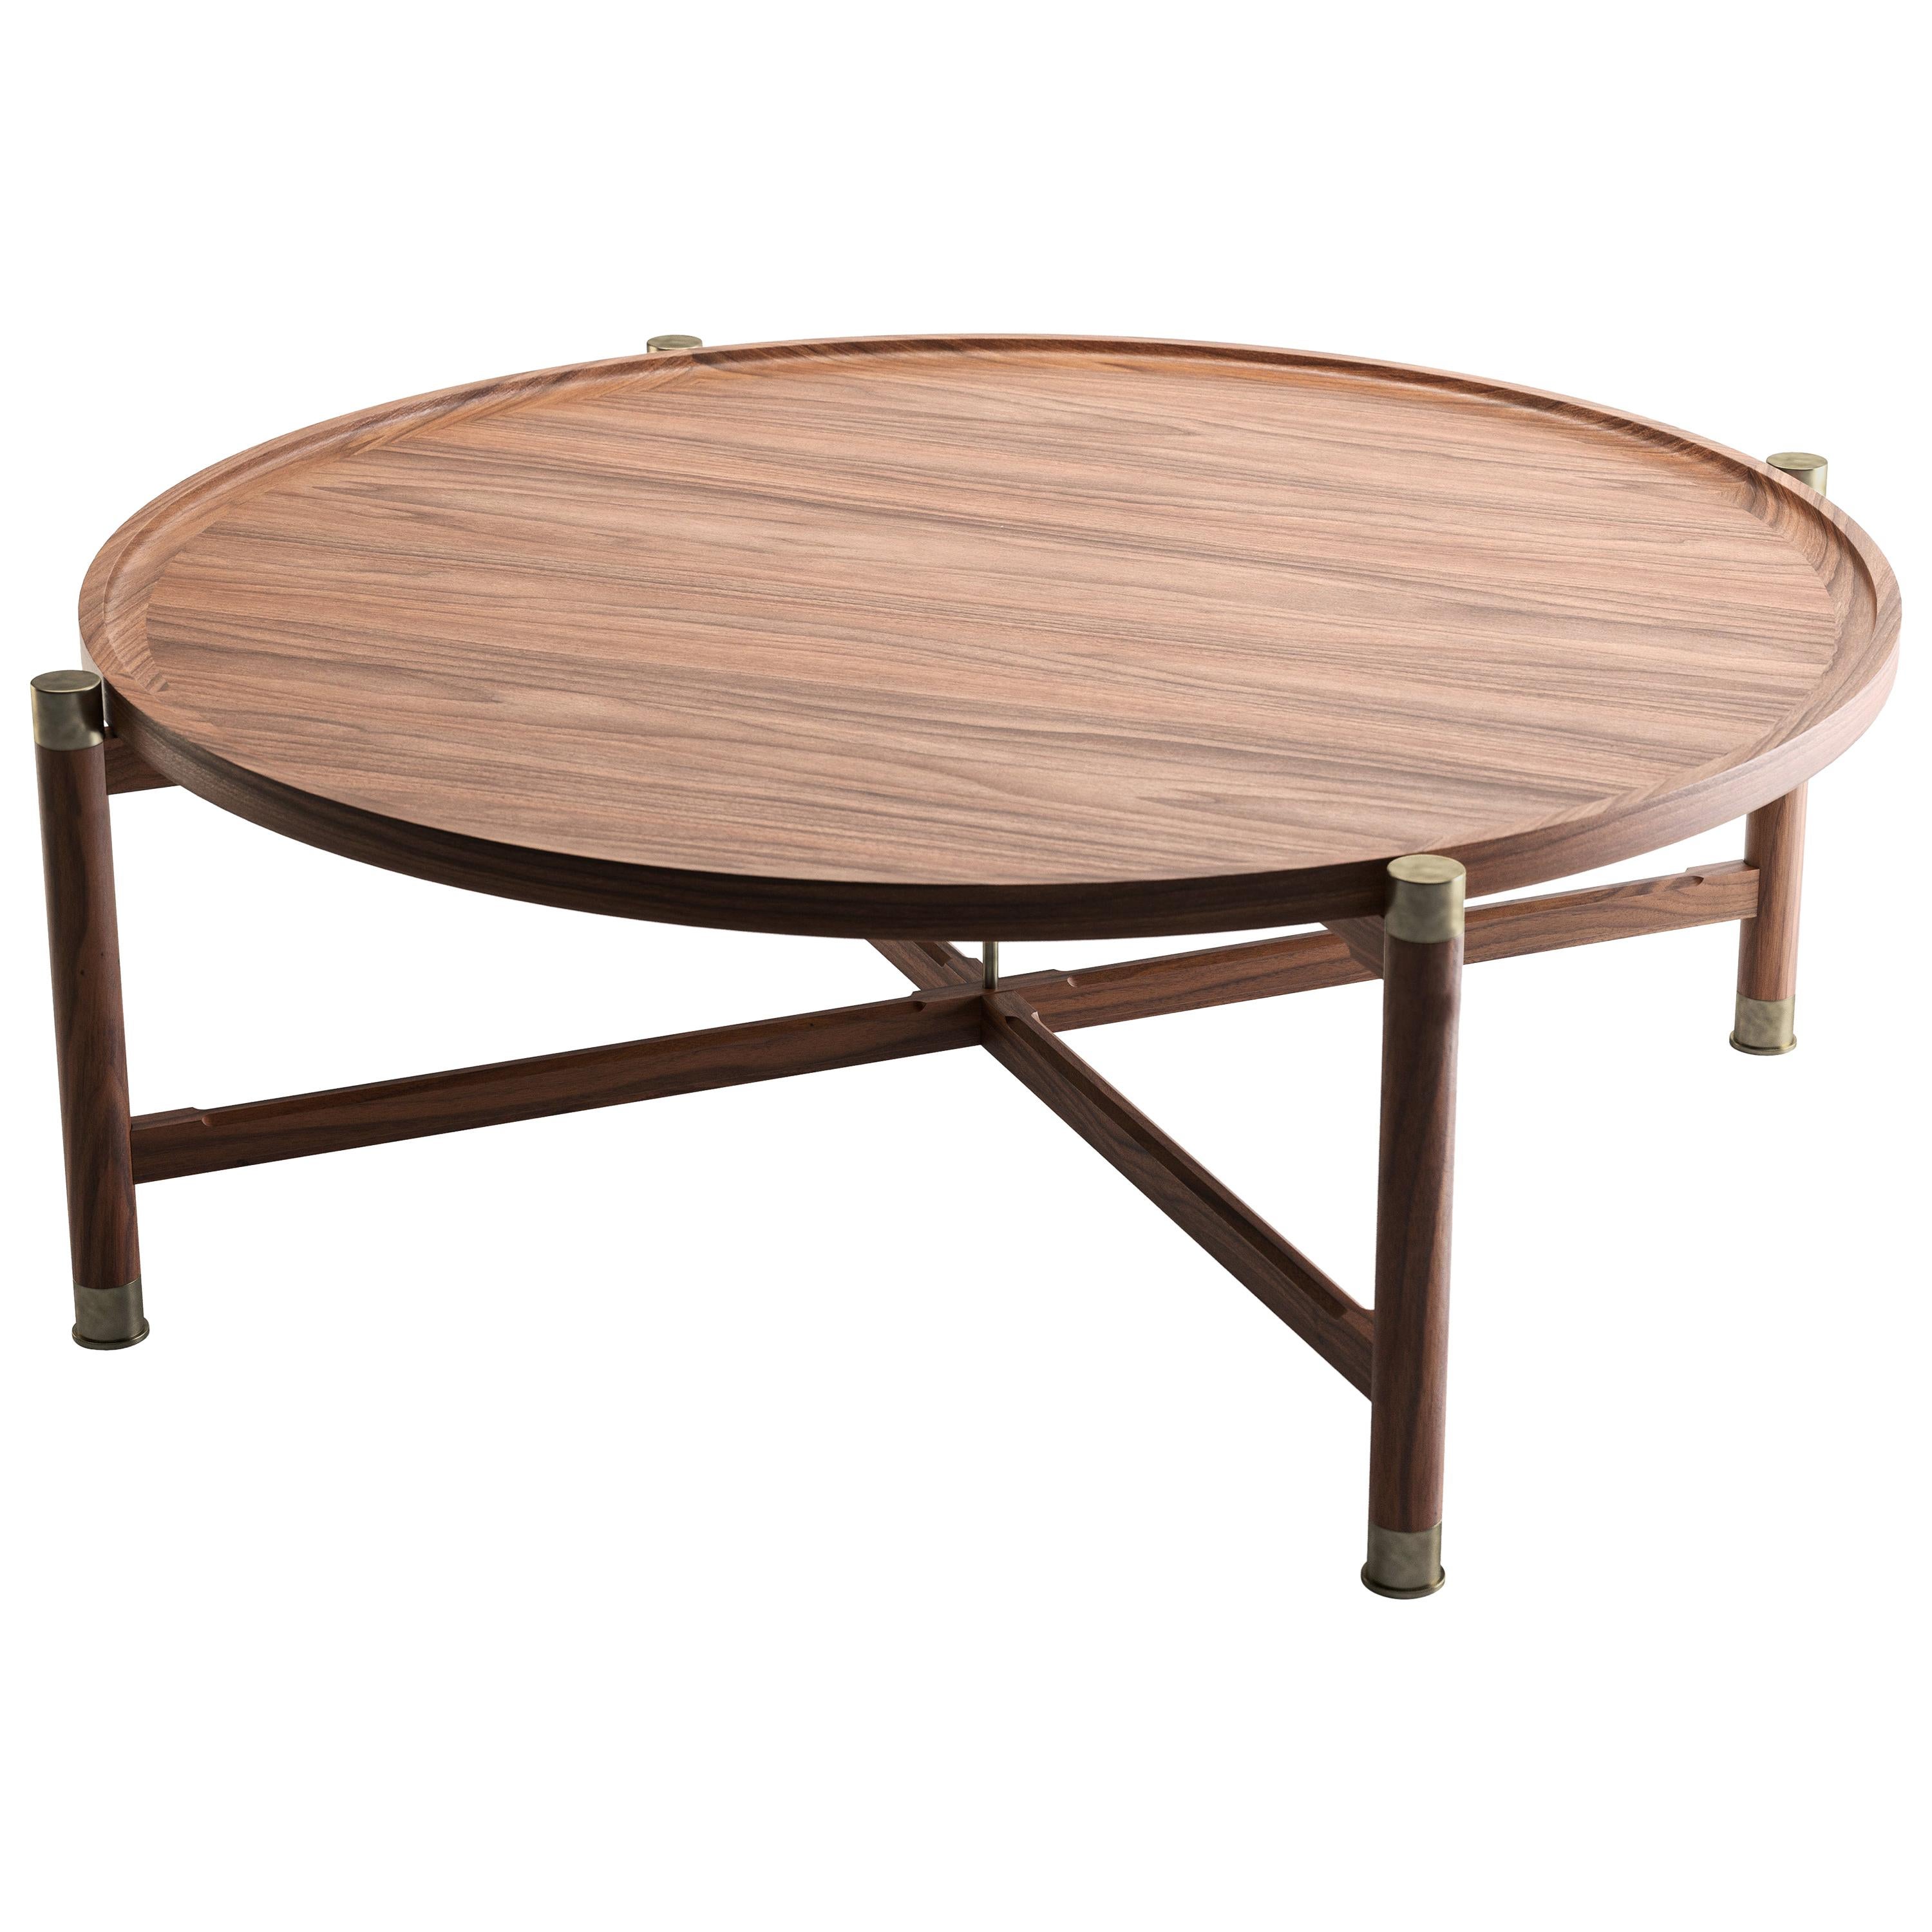 Otto Round Coffee Table in Light Walnut with Antique Brass Fittings and Stem